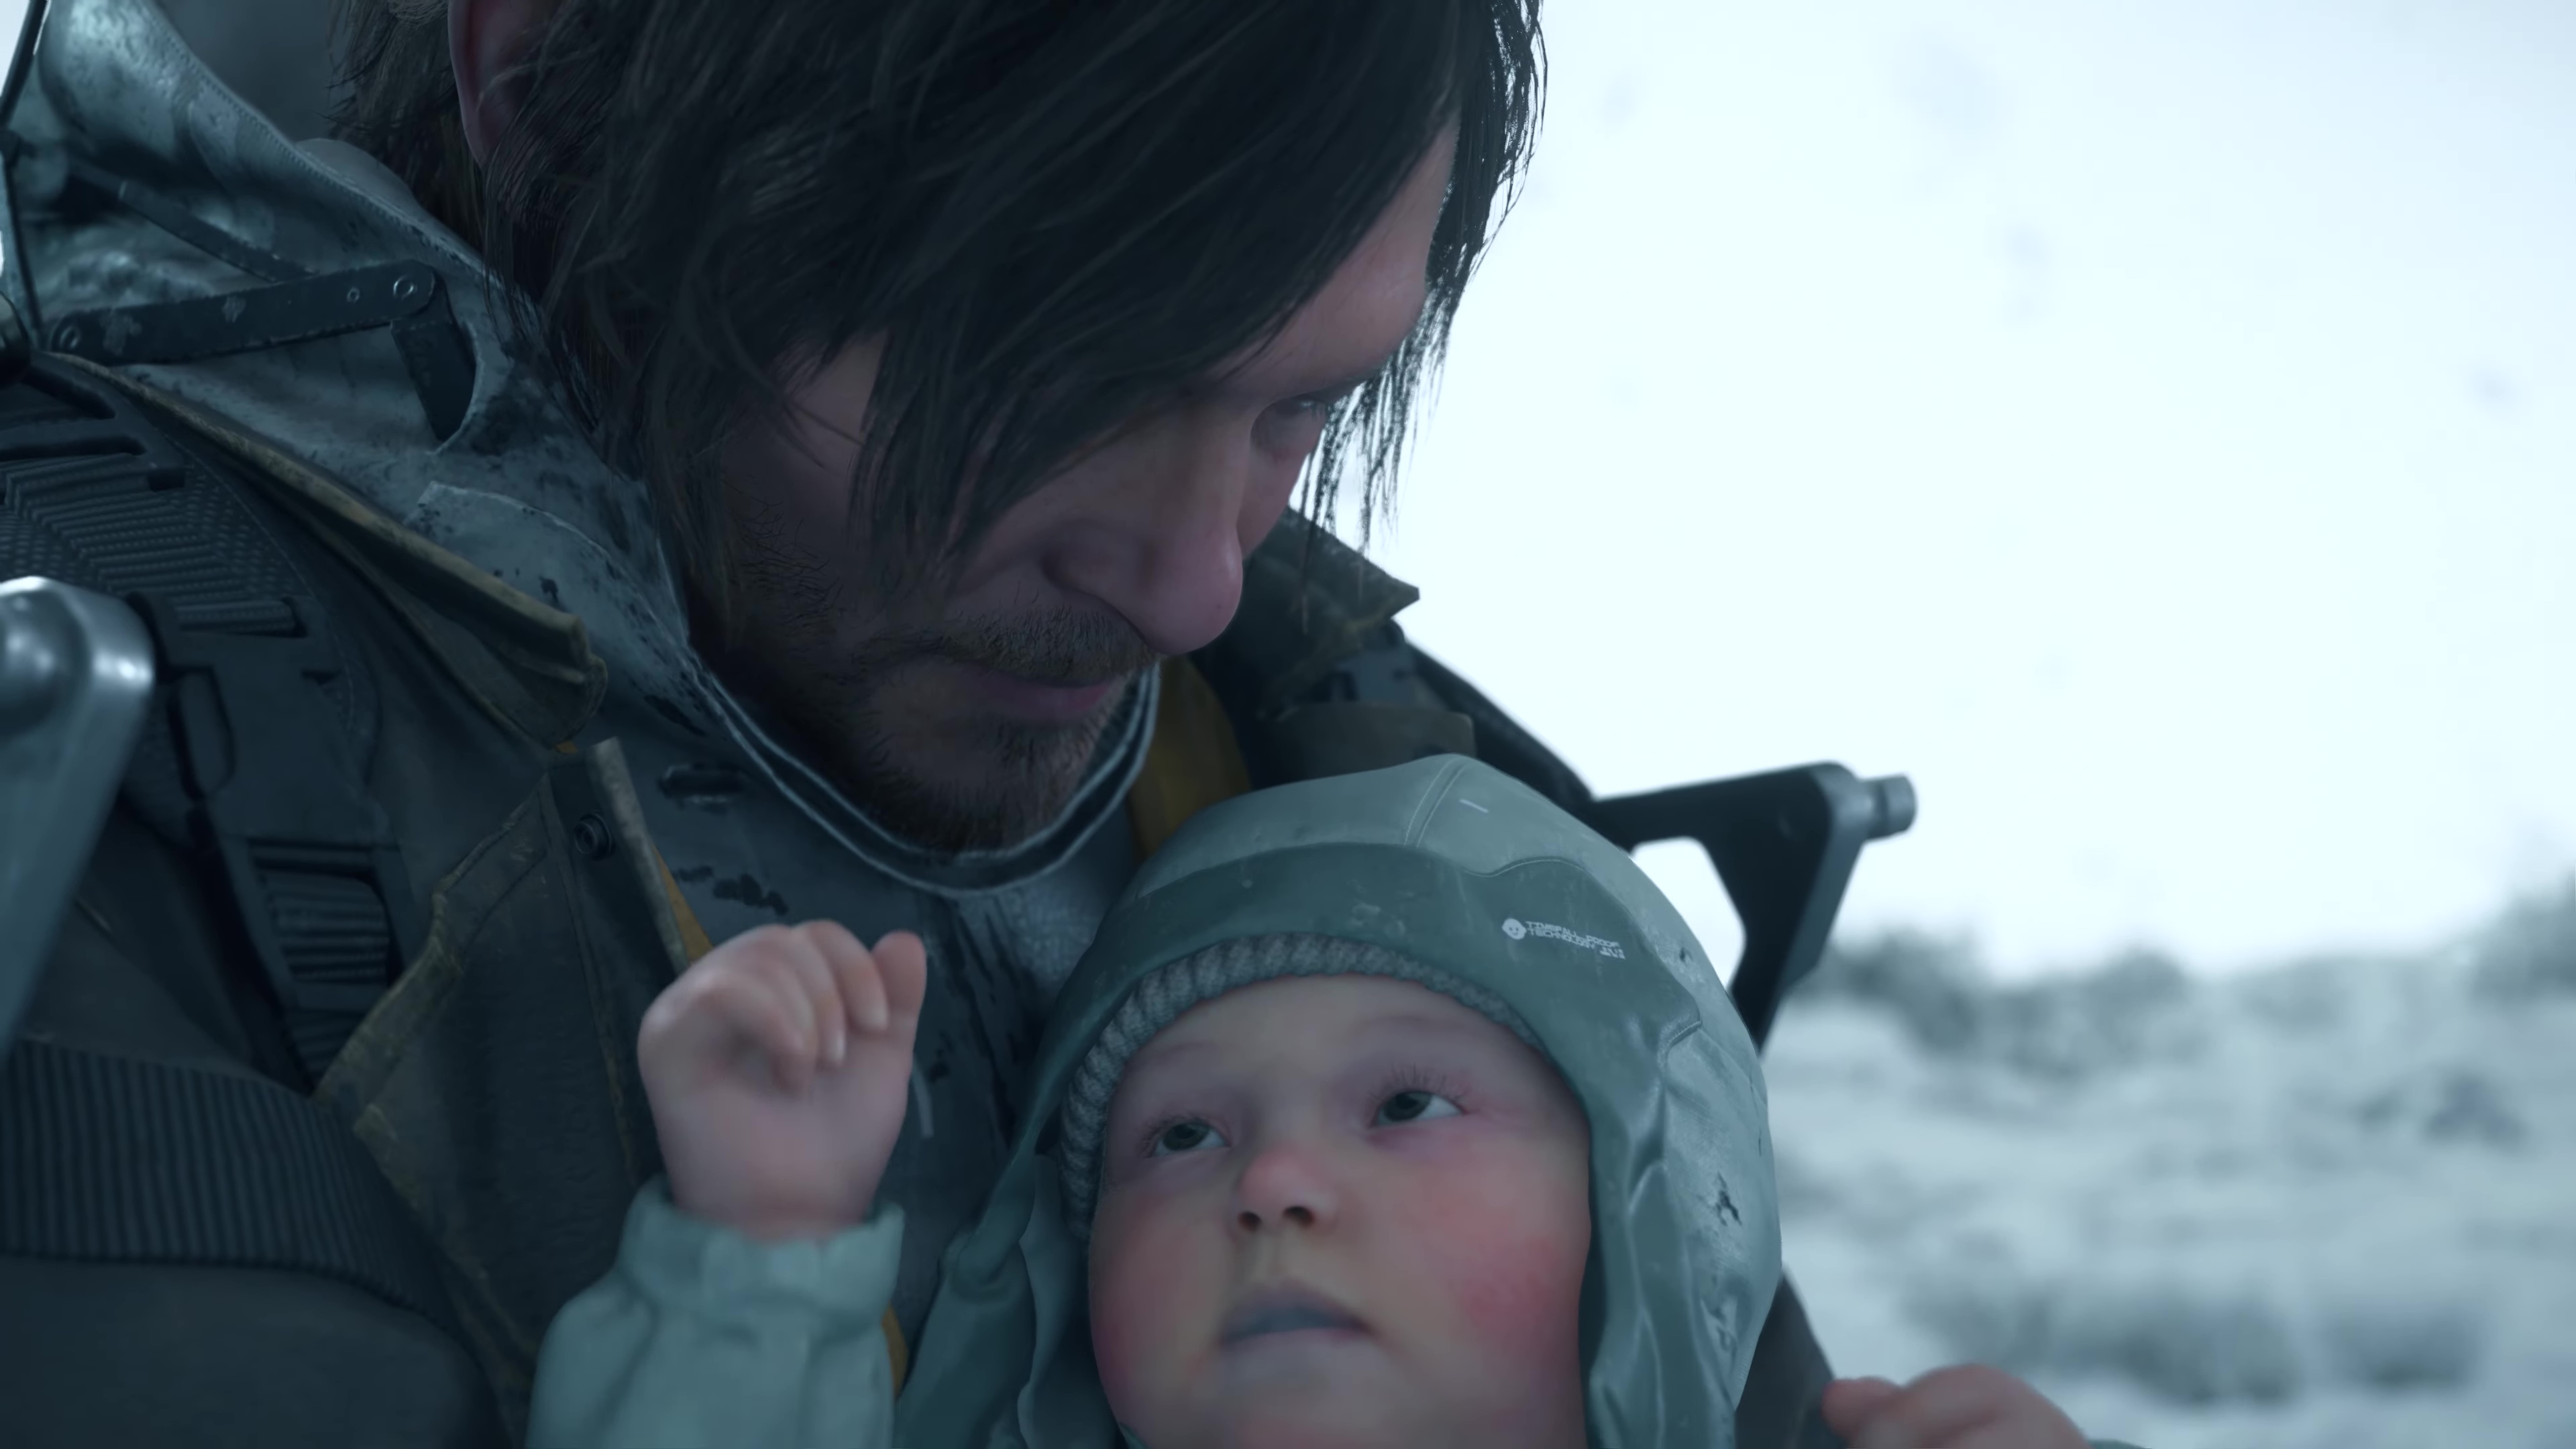  Everything cool I noticed in the new Death Stranding 2 trailer after sinking 150 hours into the first Death Stranding 